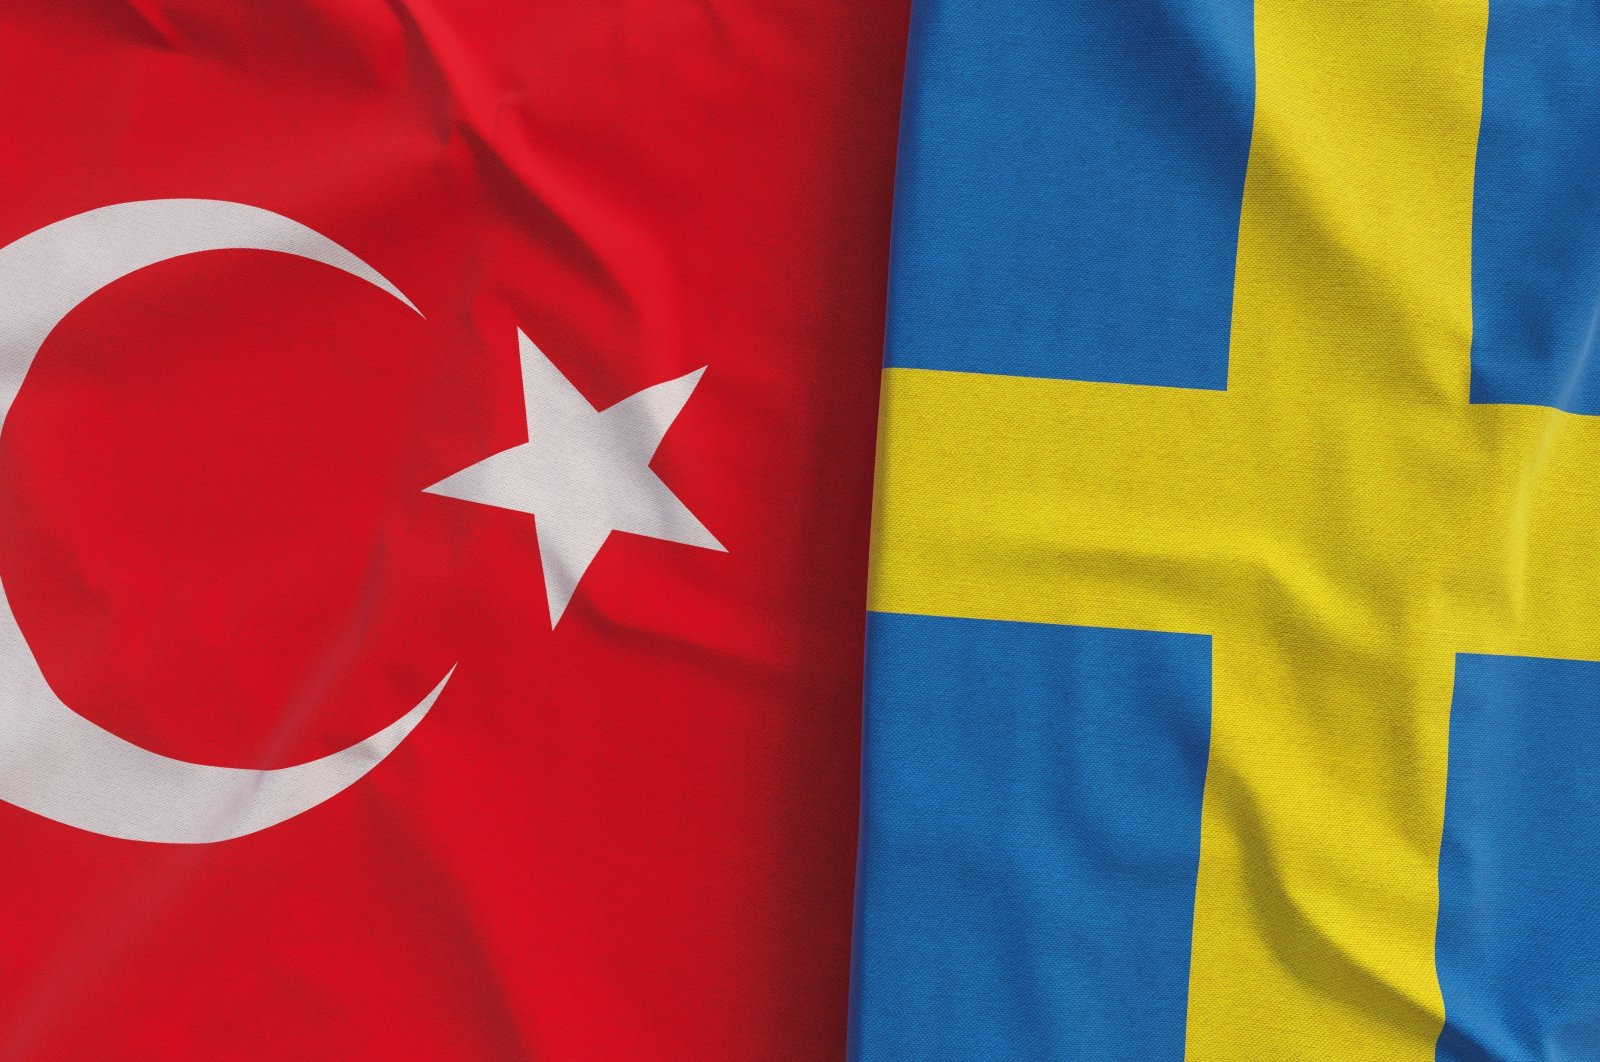 The flags of Türkiye and Sweden are seen in this undated photo. (Shutterstock Photo)